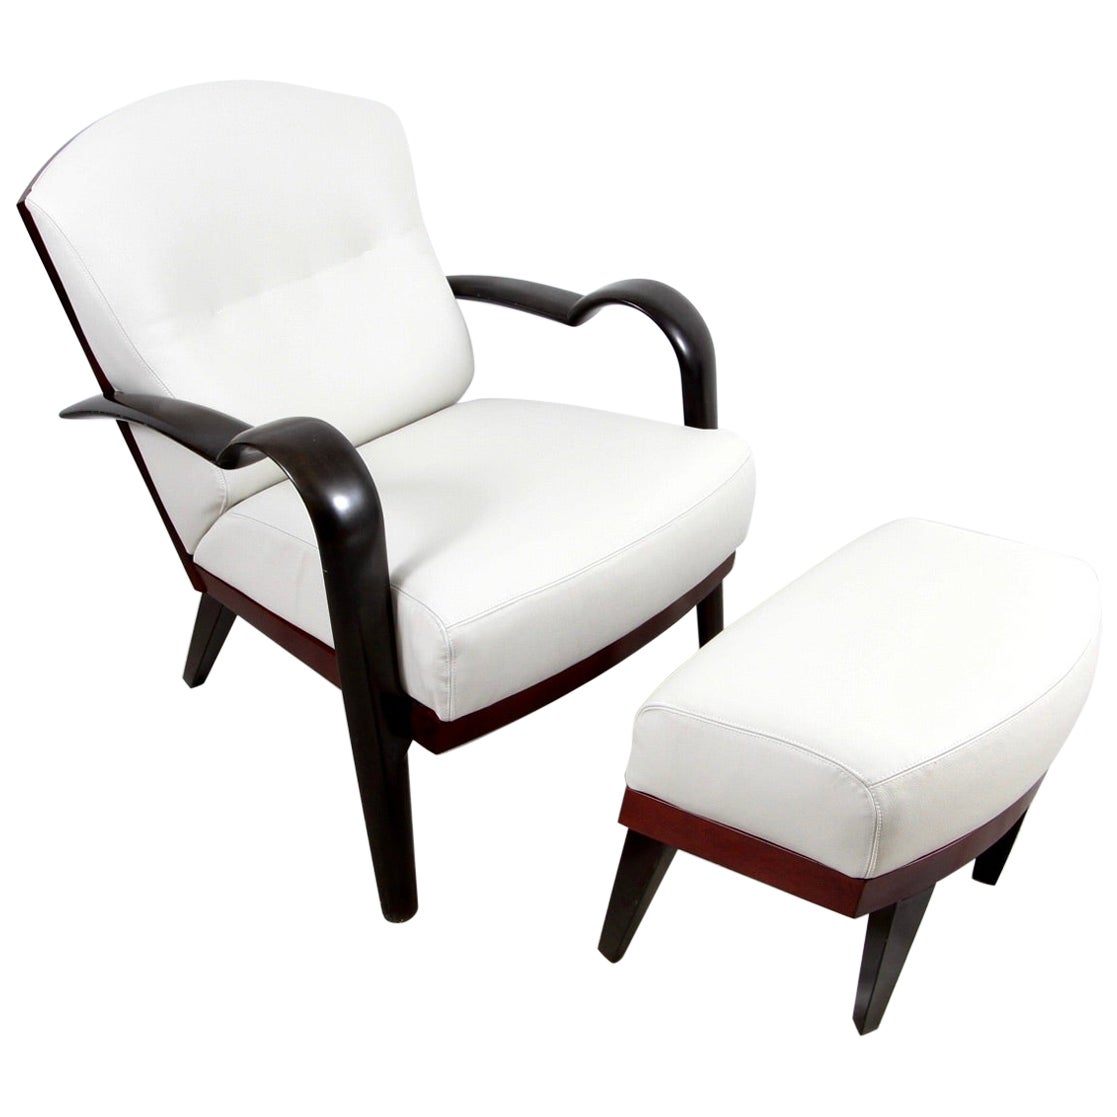 Adam Tihany "Gertrude" Chair and Ottoman by i4 Mariani for Pace Collection For Sale